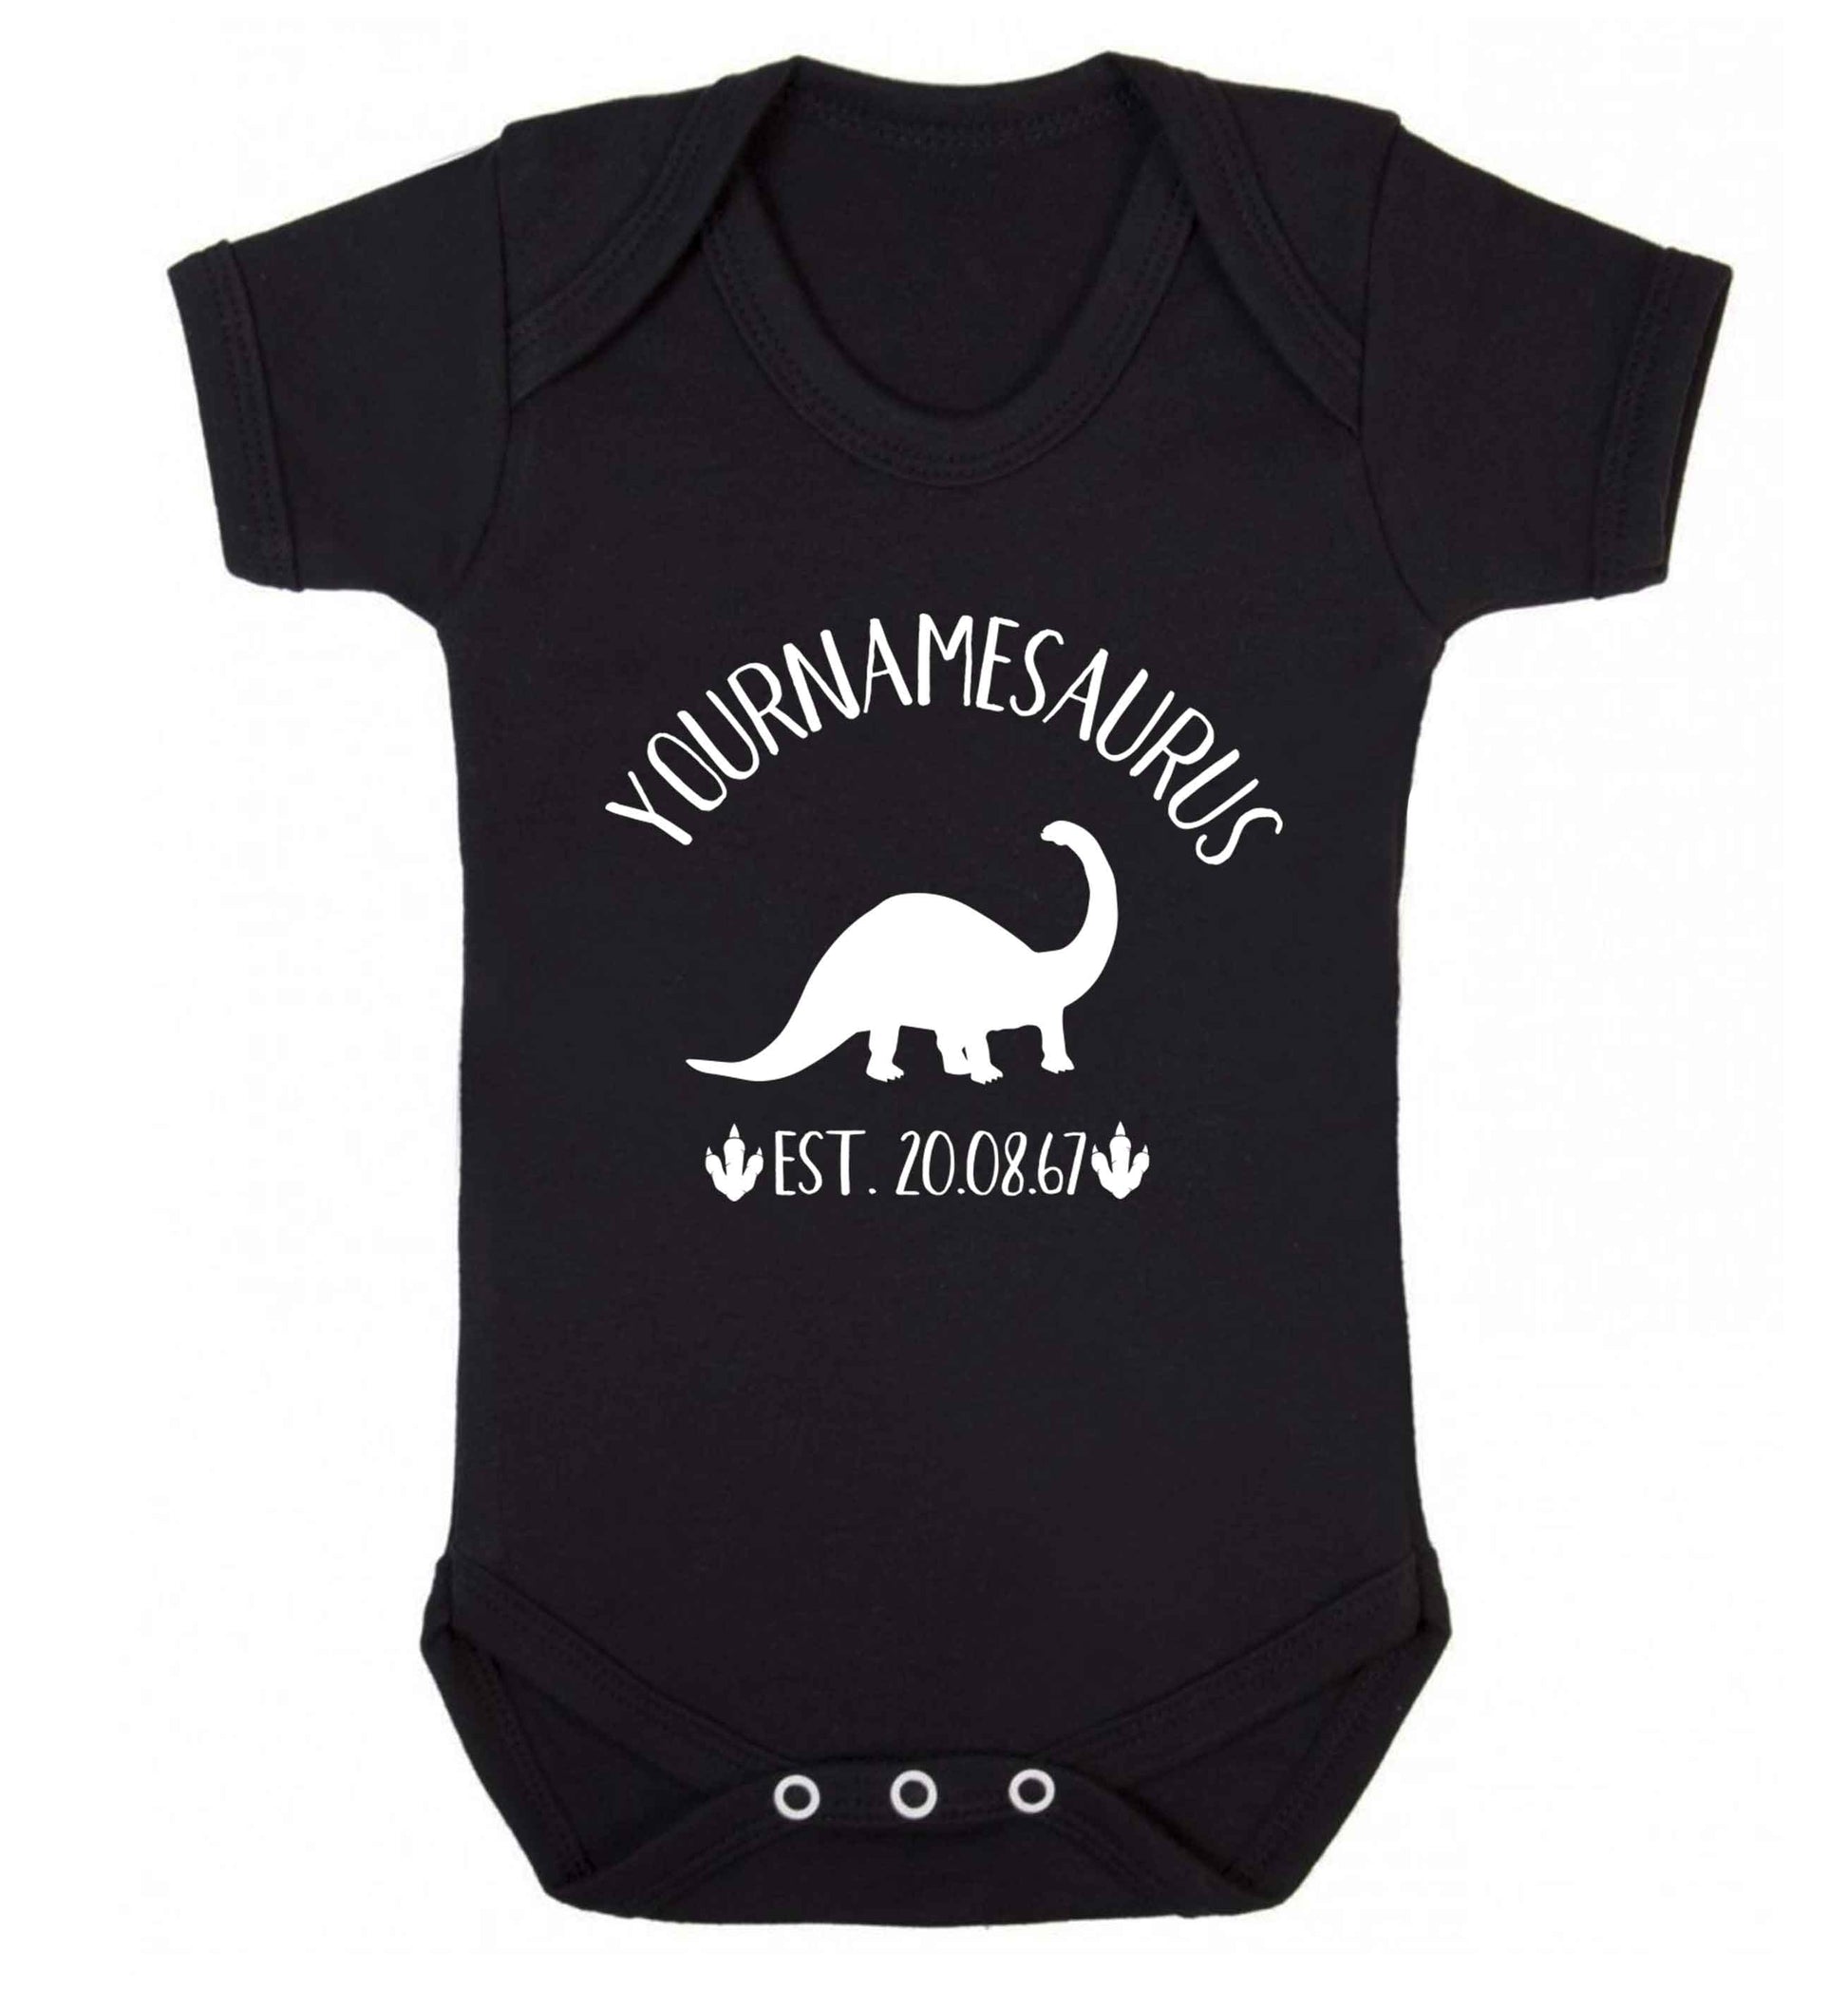 Personalised (your name) dinosaur birthday Baby Vest black 18-24 months